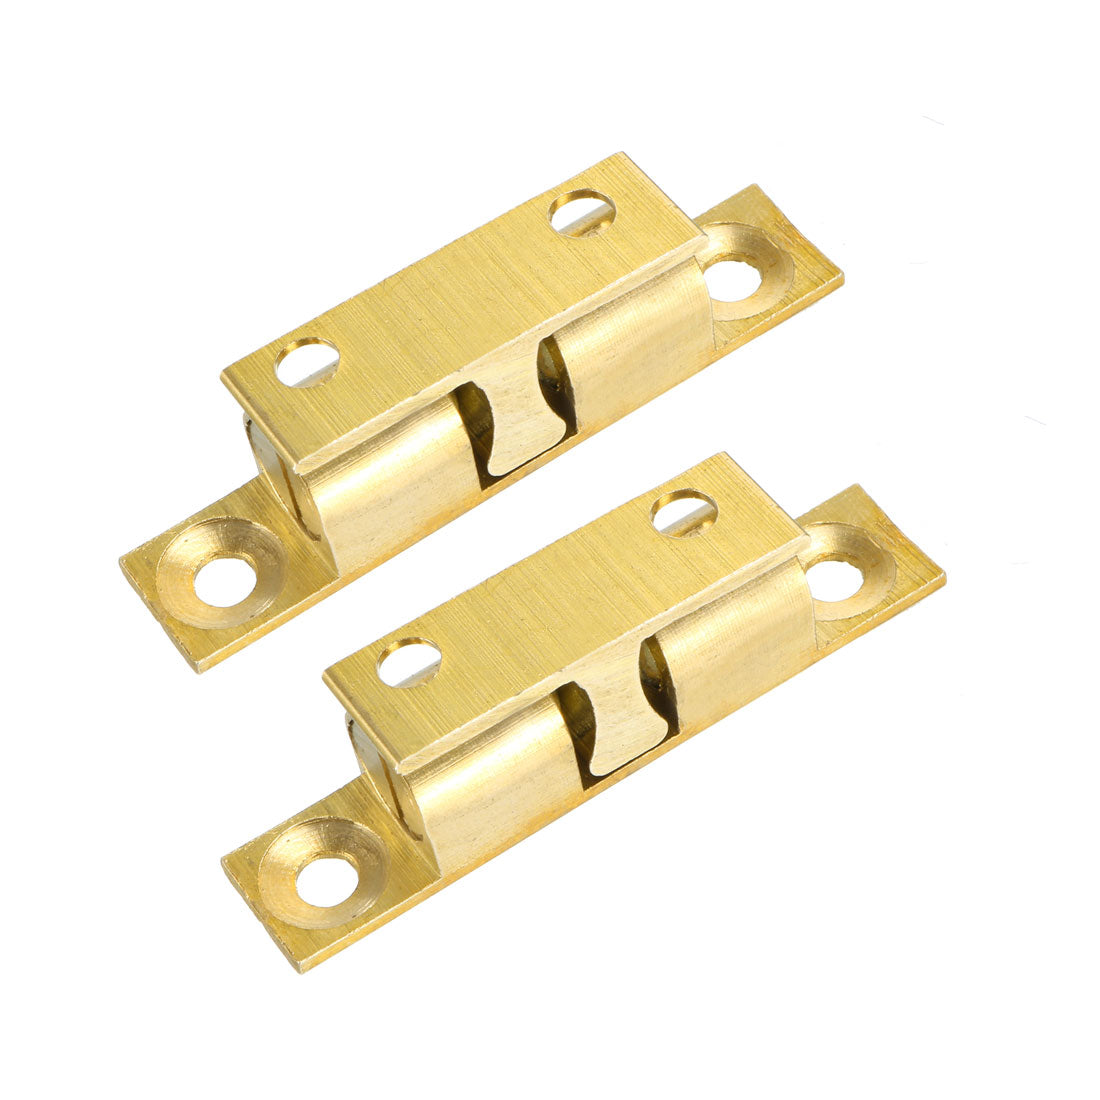 uxcell Uxcell 2pcs Cabinet Door Closet Brass Double Ball Catch Tension Latch 50mm Length Gold Tone